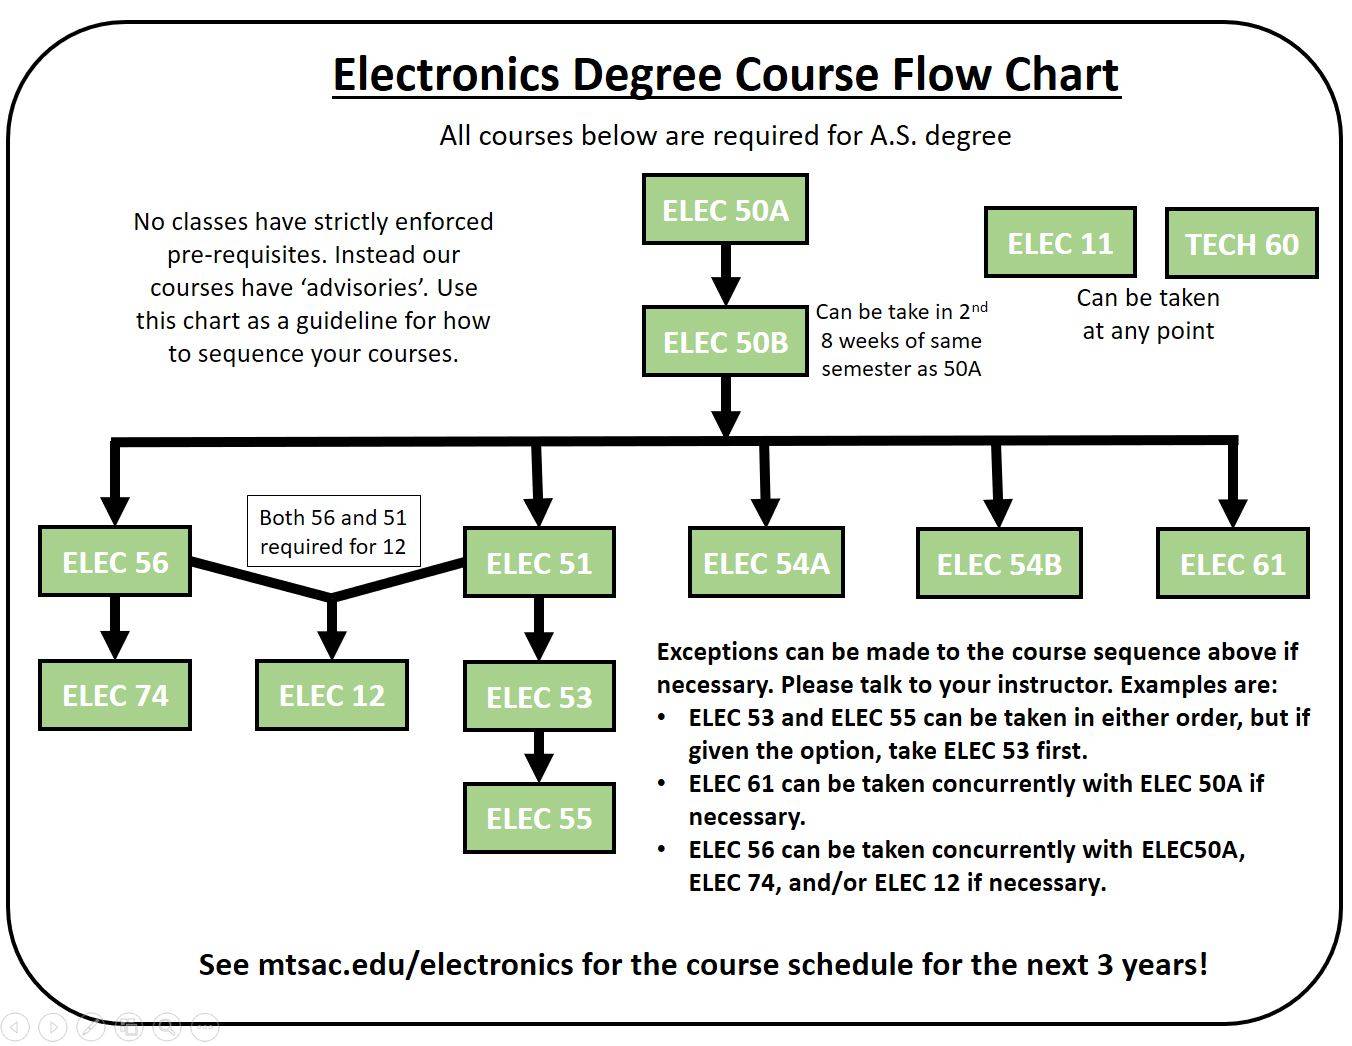 All courses above are required for the A.S. degree. No Classes have strictly enforced pre-requisites. Instead, our courses have ‘advisories’. Use this chart as a guideline for how to sequence your classes. After completion of ELEC 50A and ELEC 50B, (ELEC 50B can be taken in second 8 weeks of the same semester of 50A) you can proceed to ELEC 56, ELEC 51, ELEC 54A, ELEC 54B, or ELEC 61. After completion of ELEC 56, ELEC 74 or ELEC 12 may be taken (ELEC 56 and ELEC 51 are both required to take ELEC 12). After completion of ELEC 51, ELEC 53 may be taken. After completion of ELEC 53, ELEC 55 may be taken. Exceptions can be made to the course sequence above if necessary. Please talk to your instructor. Examples are: ELEC 53 and ELEC 55 can be taken either in order, but if given the option, take ELEC 53 first. ELEC 62 can be taken concurrently with ELEC 50A if necessary. ELEC 56 can be taken concurrently with ELEC 50A, ELEC 74, and/or ELEC 12 if necessary. See mtsac.edu/electronics for the course schedule. 